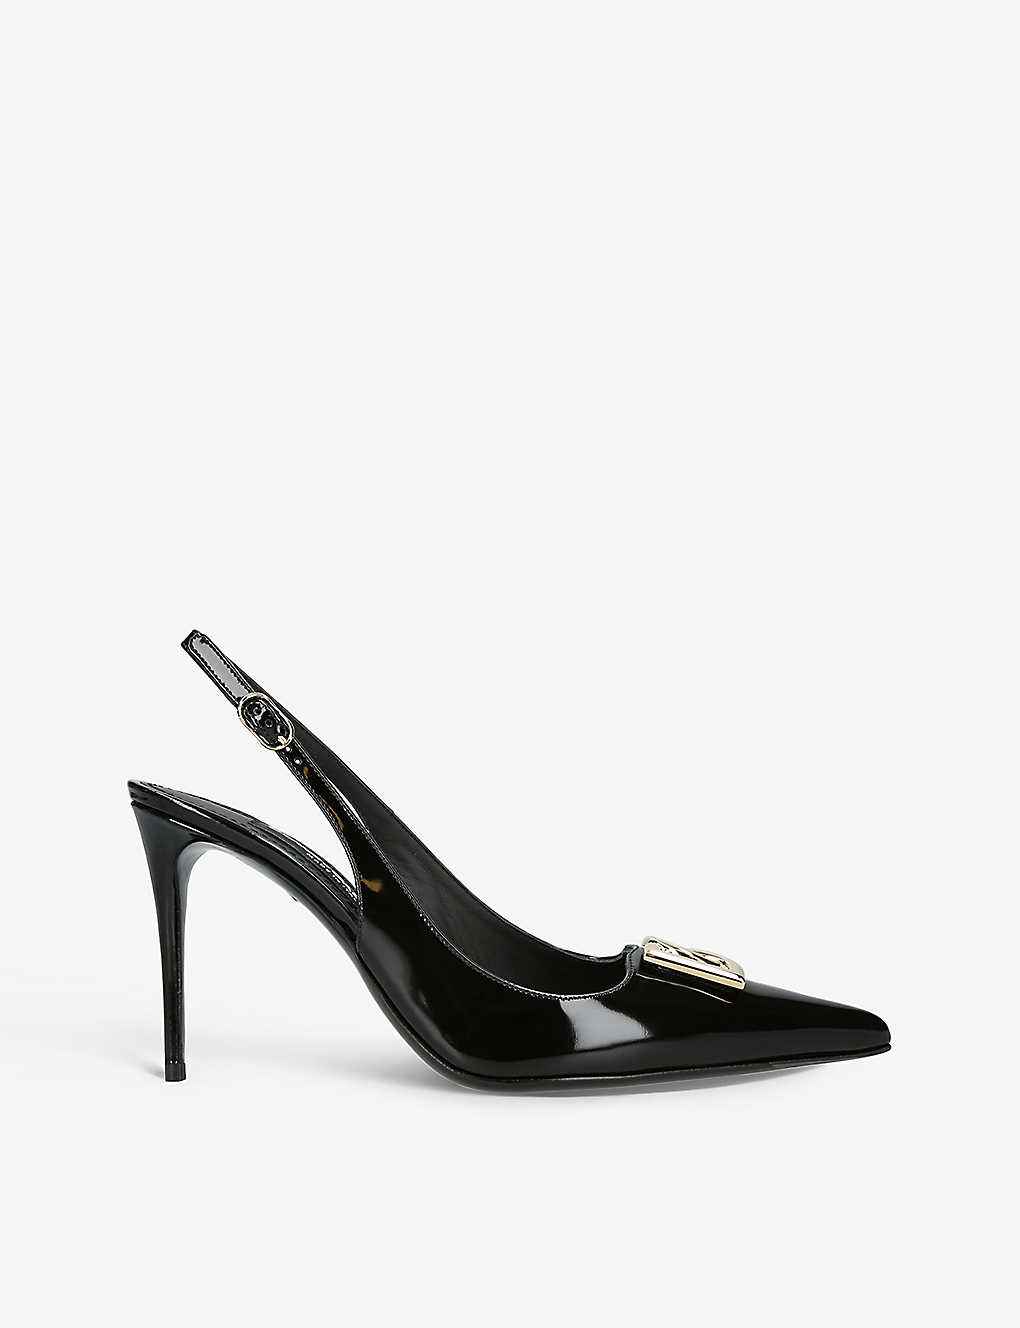 Dolce & Gabbana Devotion Patent-leather Slingback Courts In Black